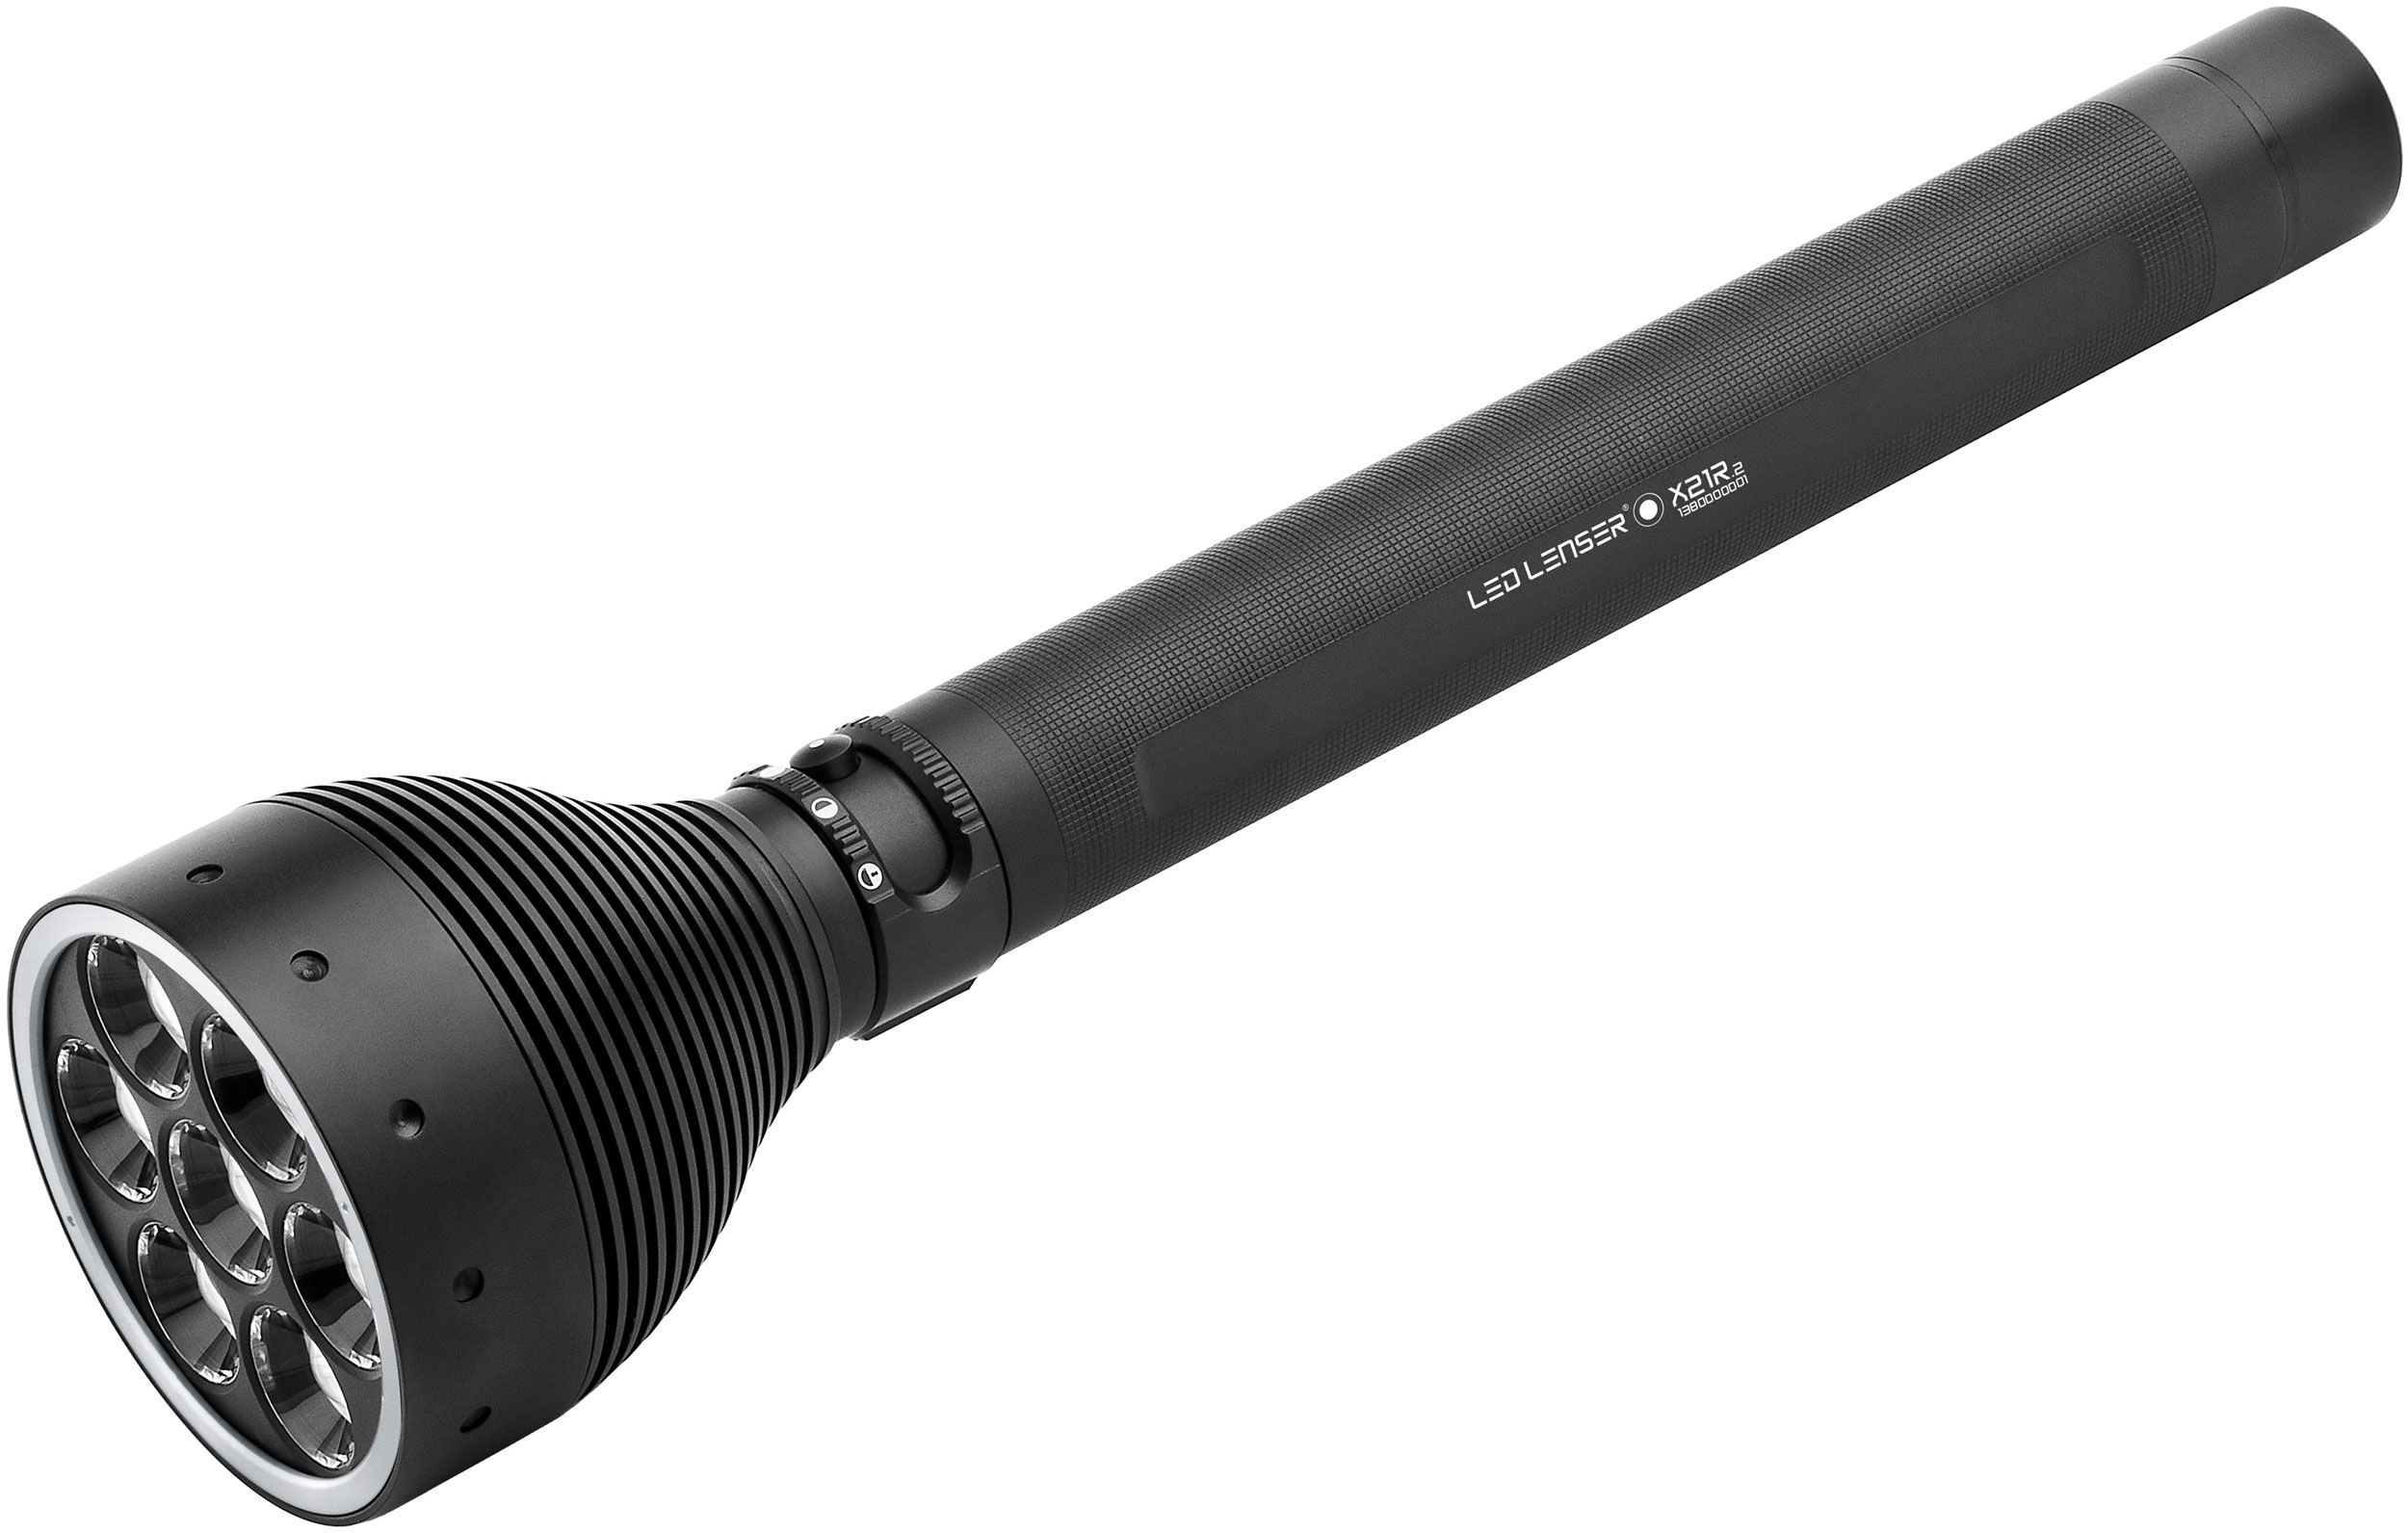 LED Lenser 880097 X21R.2 Heavy-Duty Rechargeable LED Max Lumens, Black - KnifeCenter - Discontinued